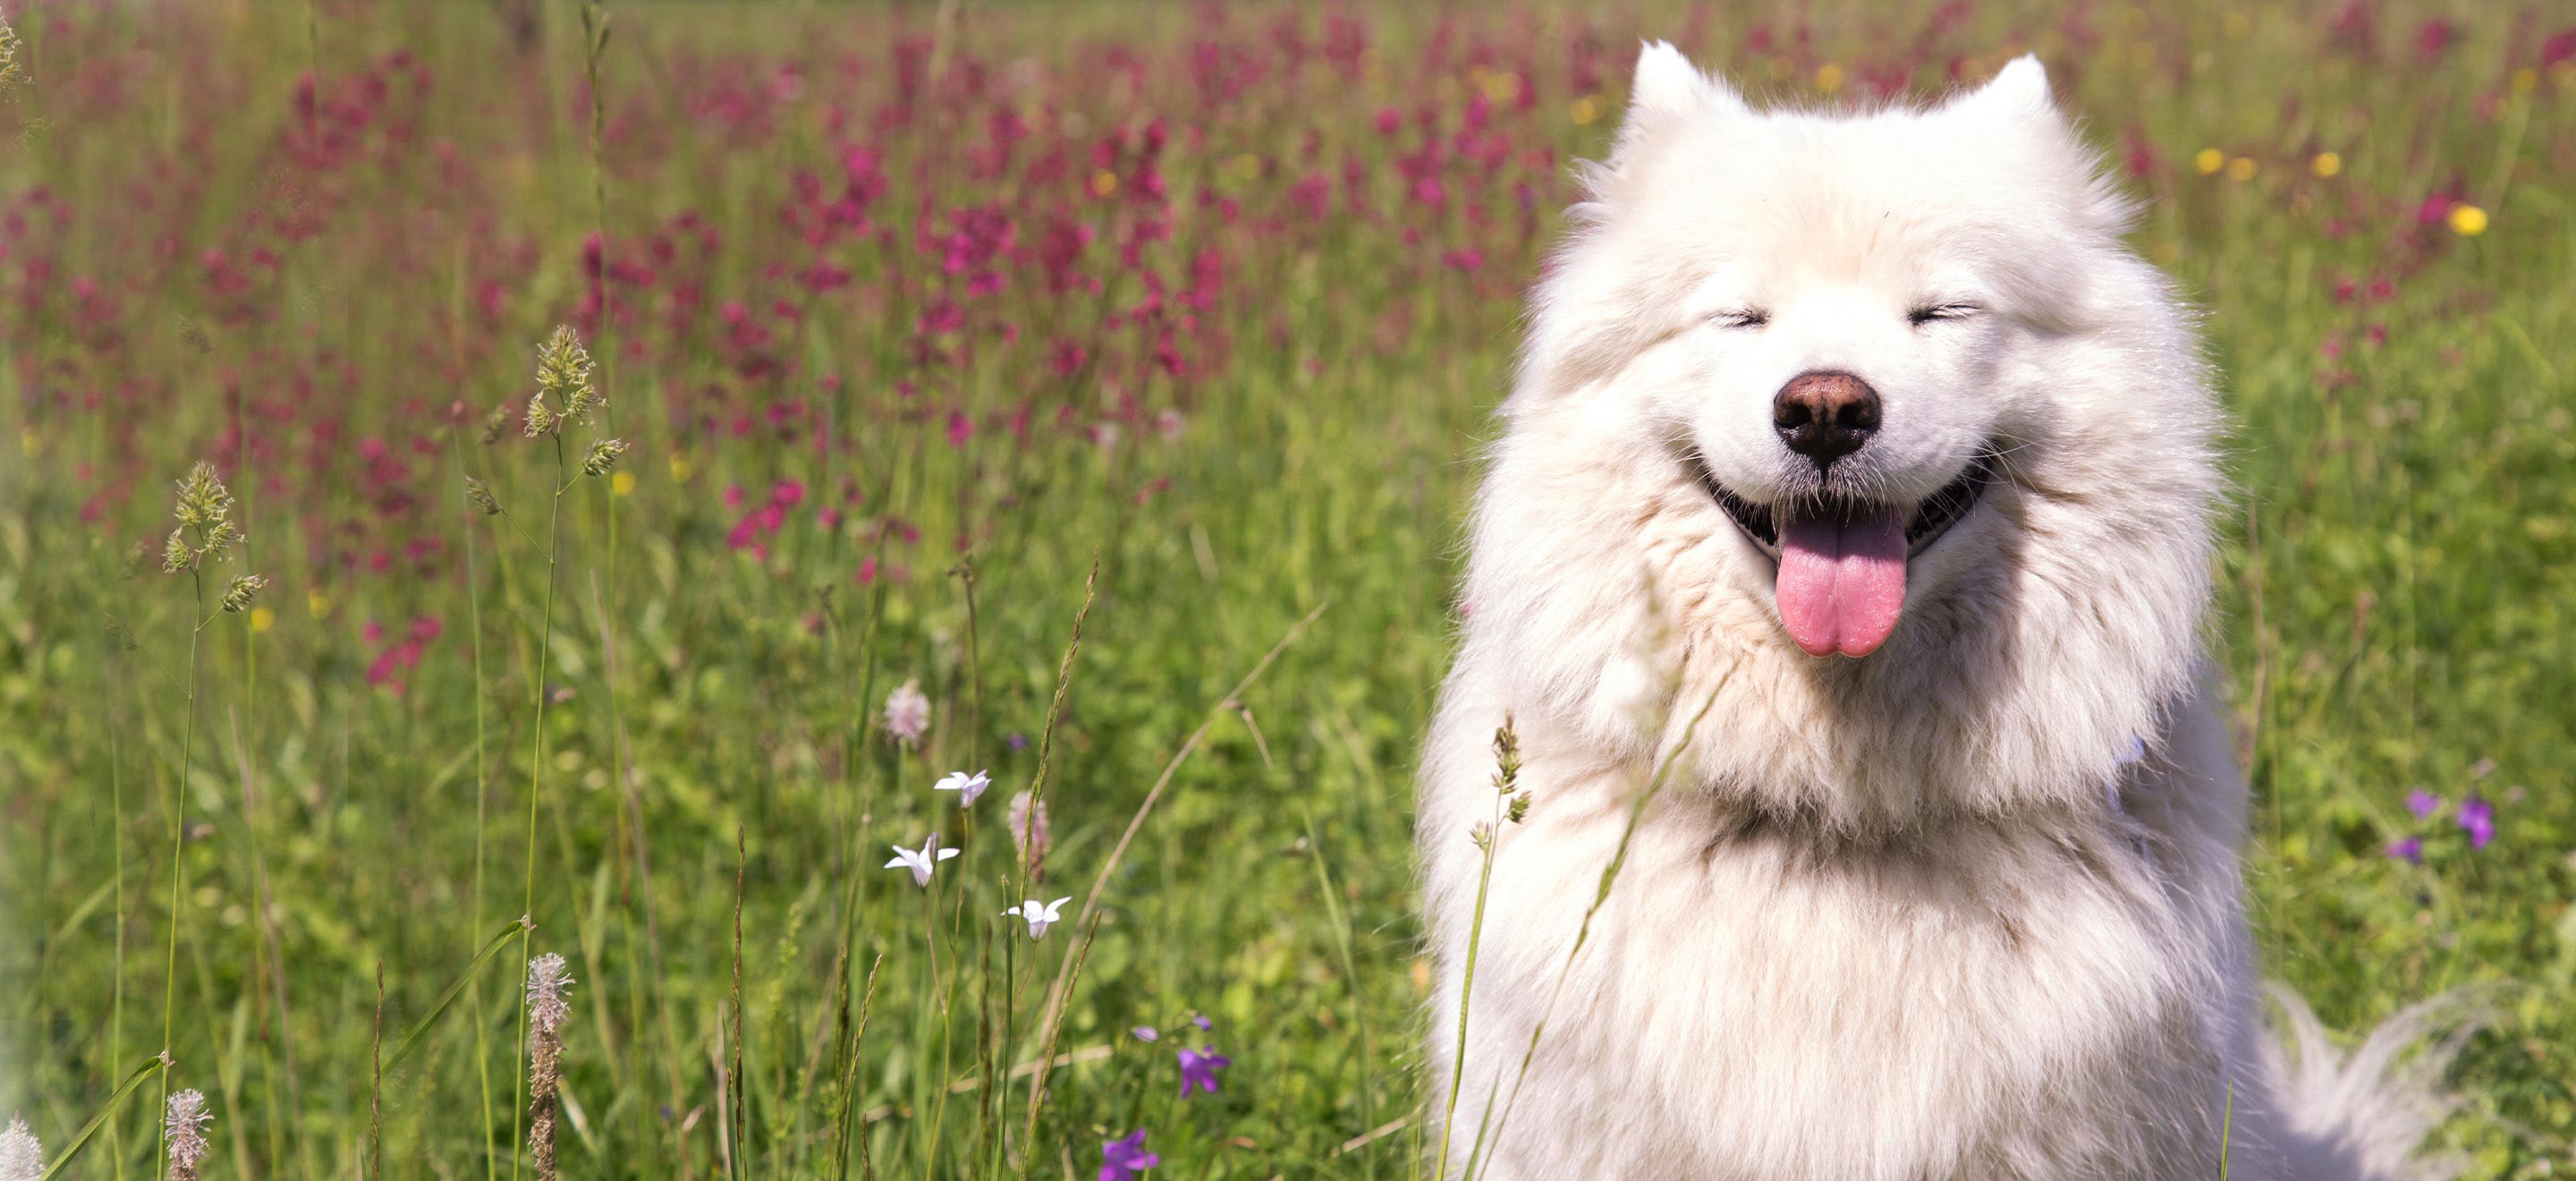 White Samoyed pup in a field image